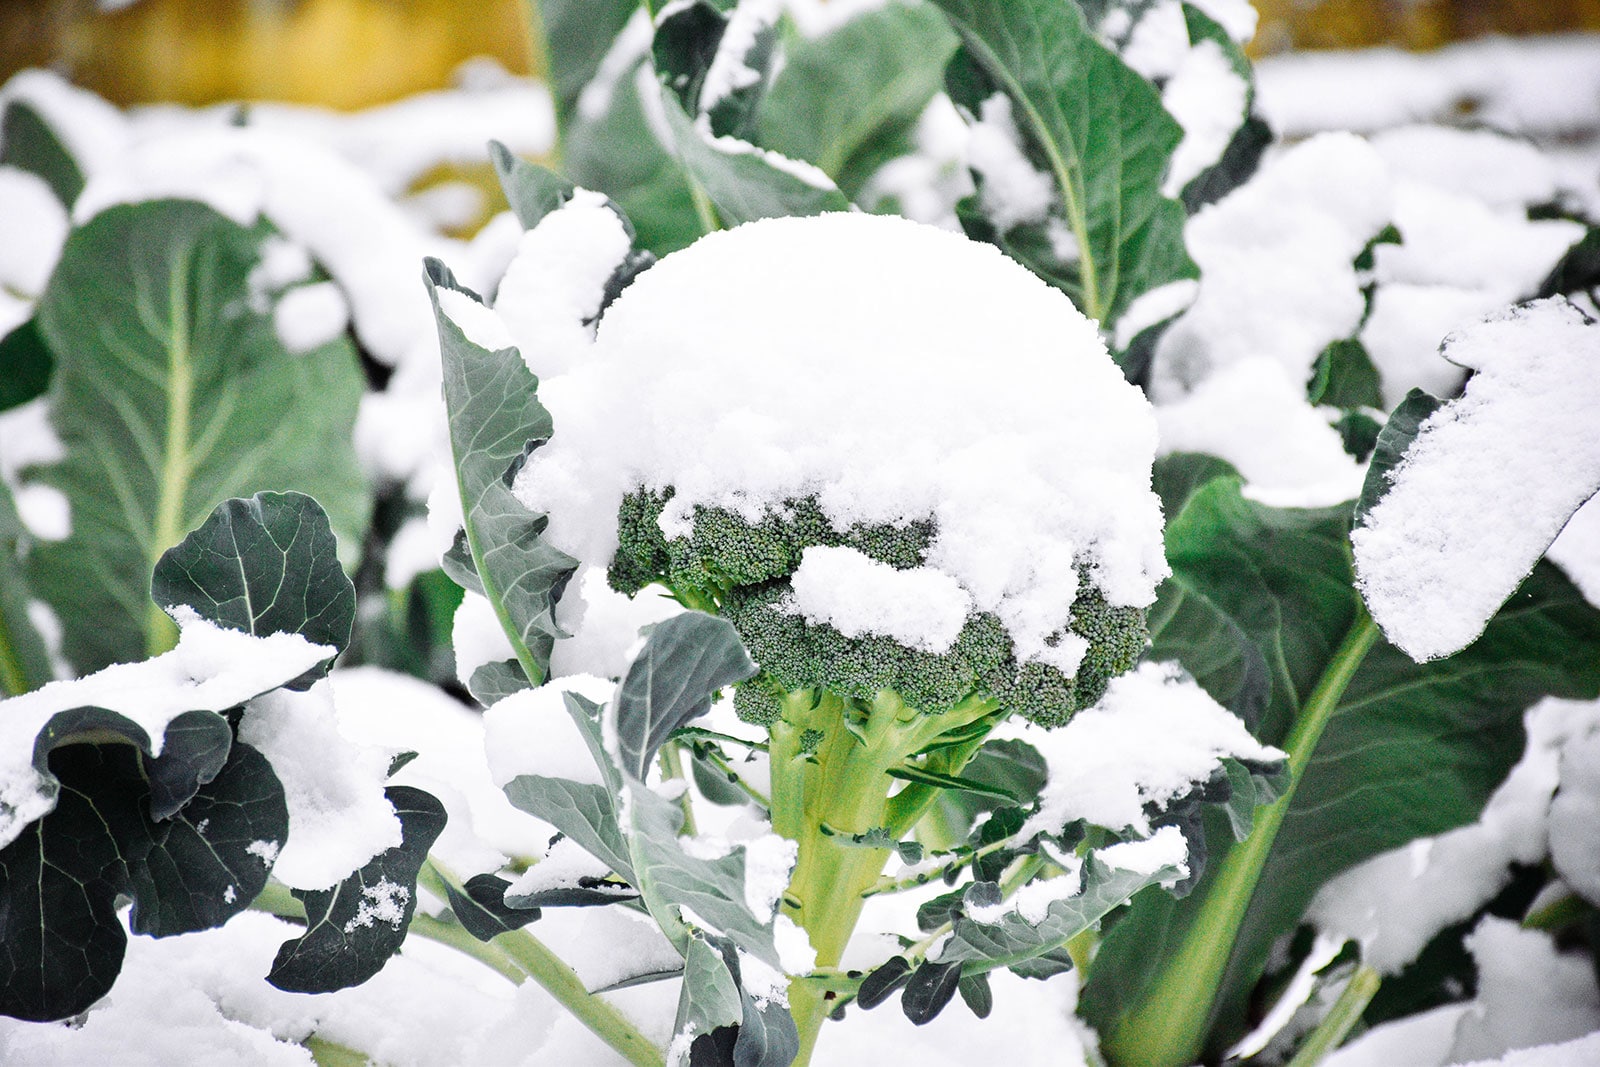 Broccoli plants in a garden covered in snow